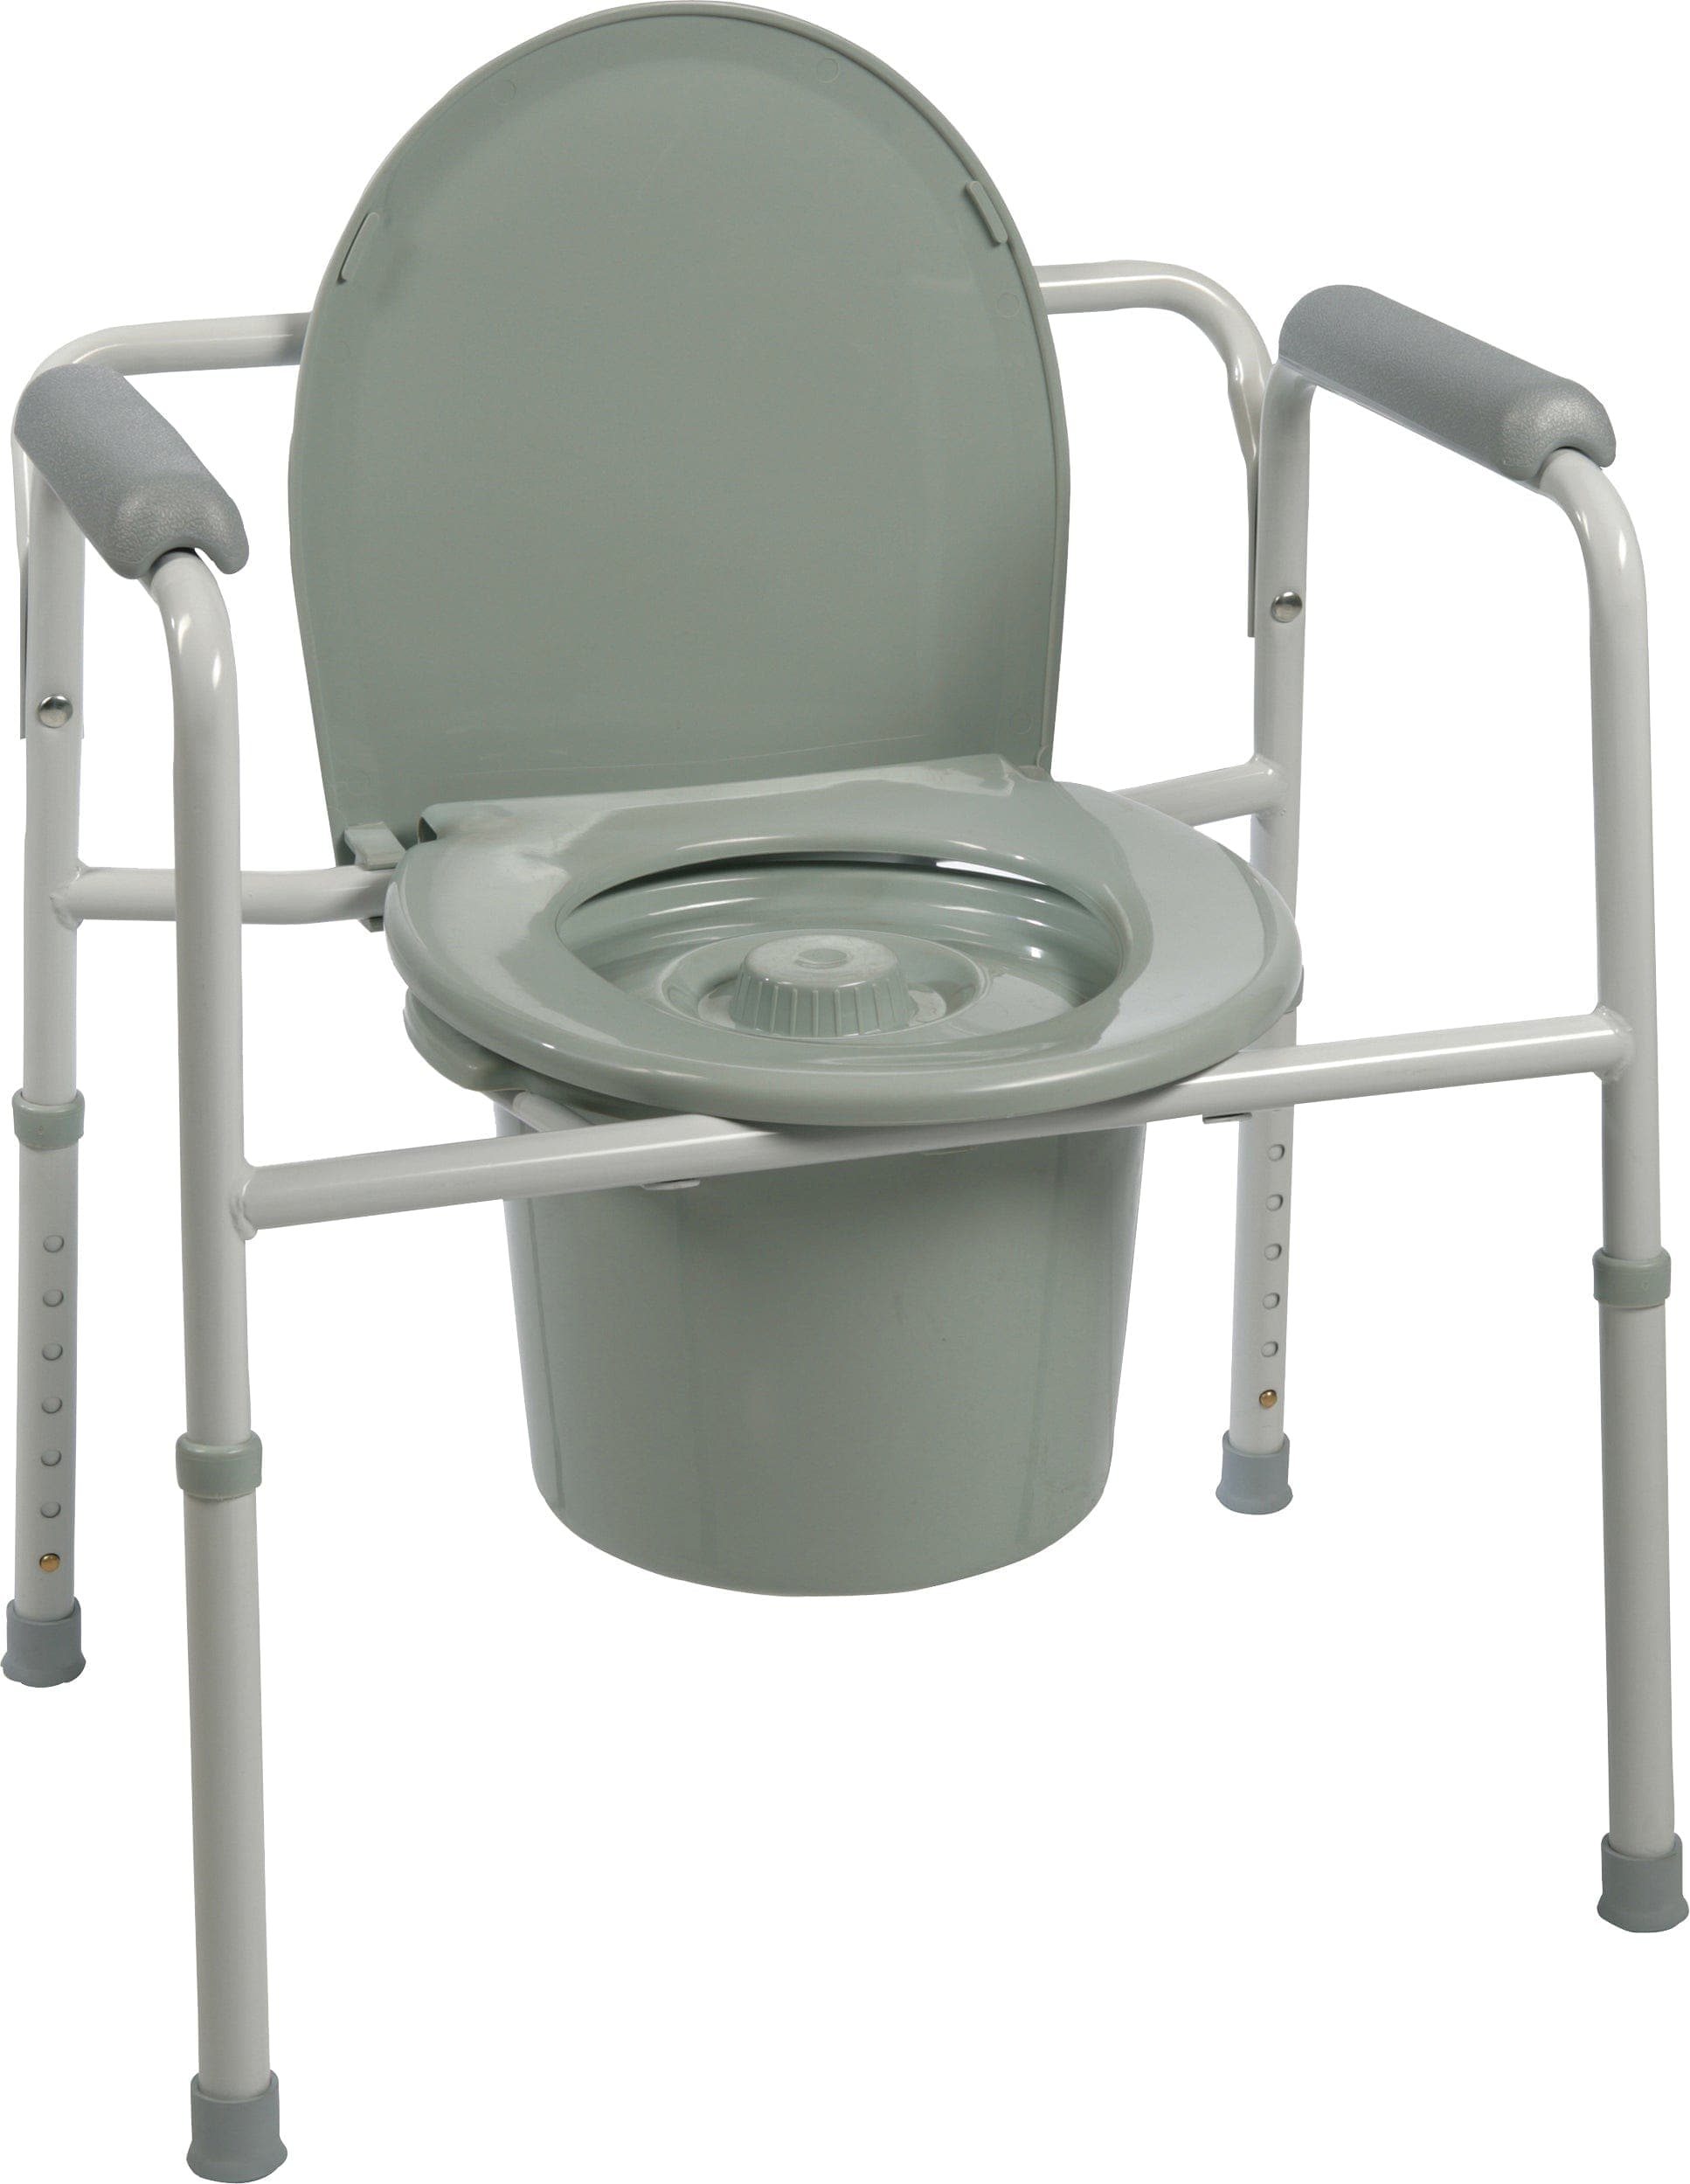 Compass Health Compass Health ProBasics Three-in-One Steel Commode with Plastic Armrests BS31C